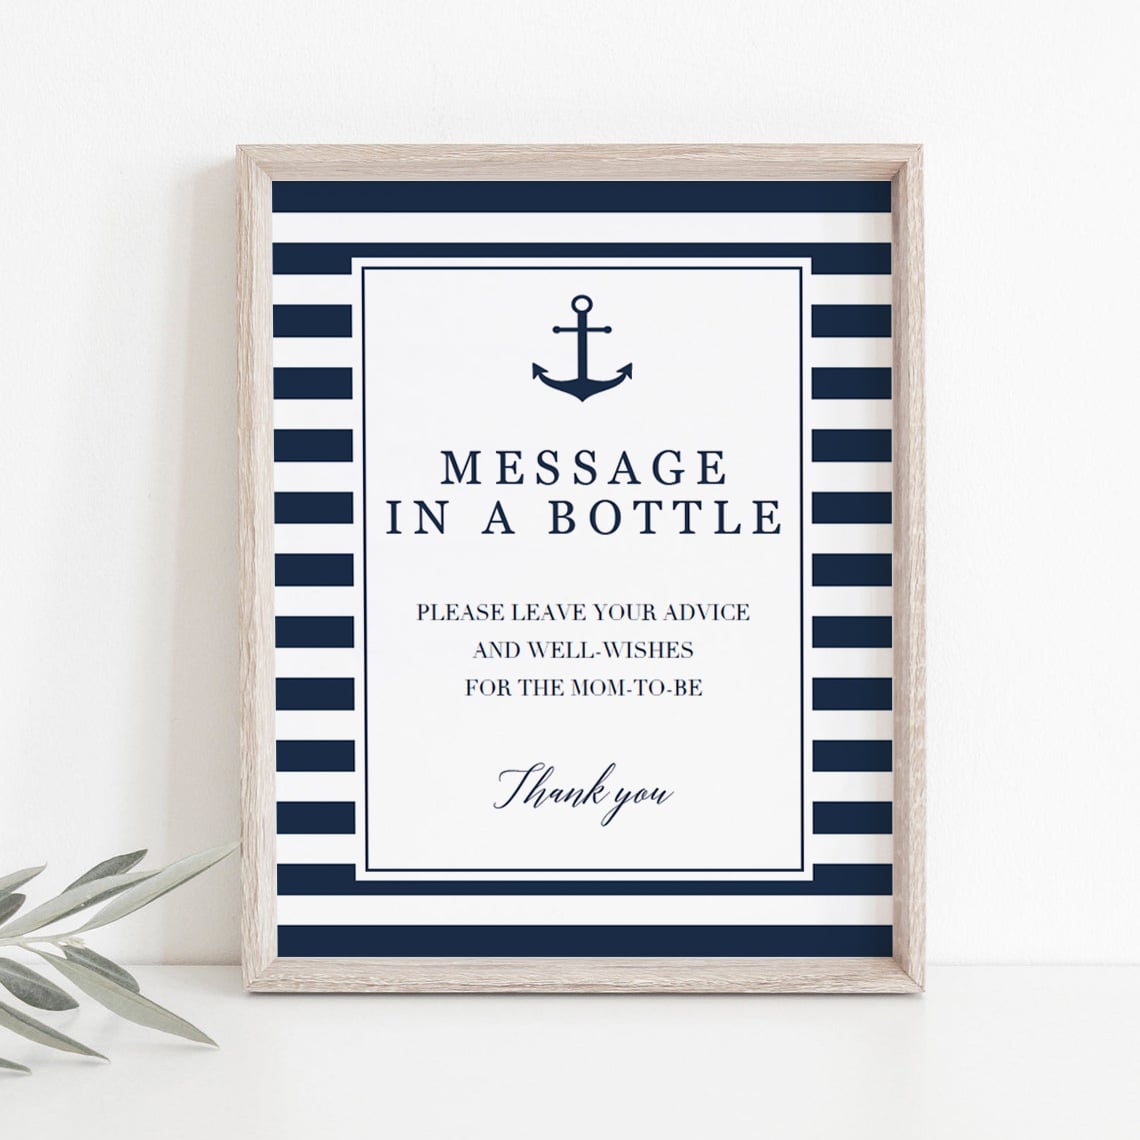 Anchor baby shower party message in a bottle sign by LittleSizzle